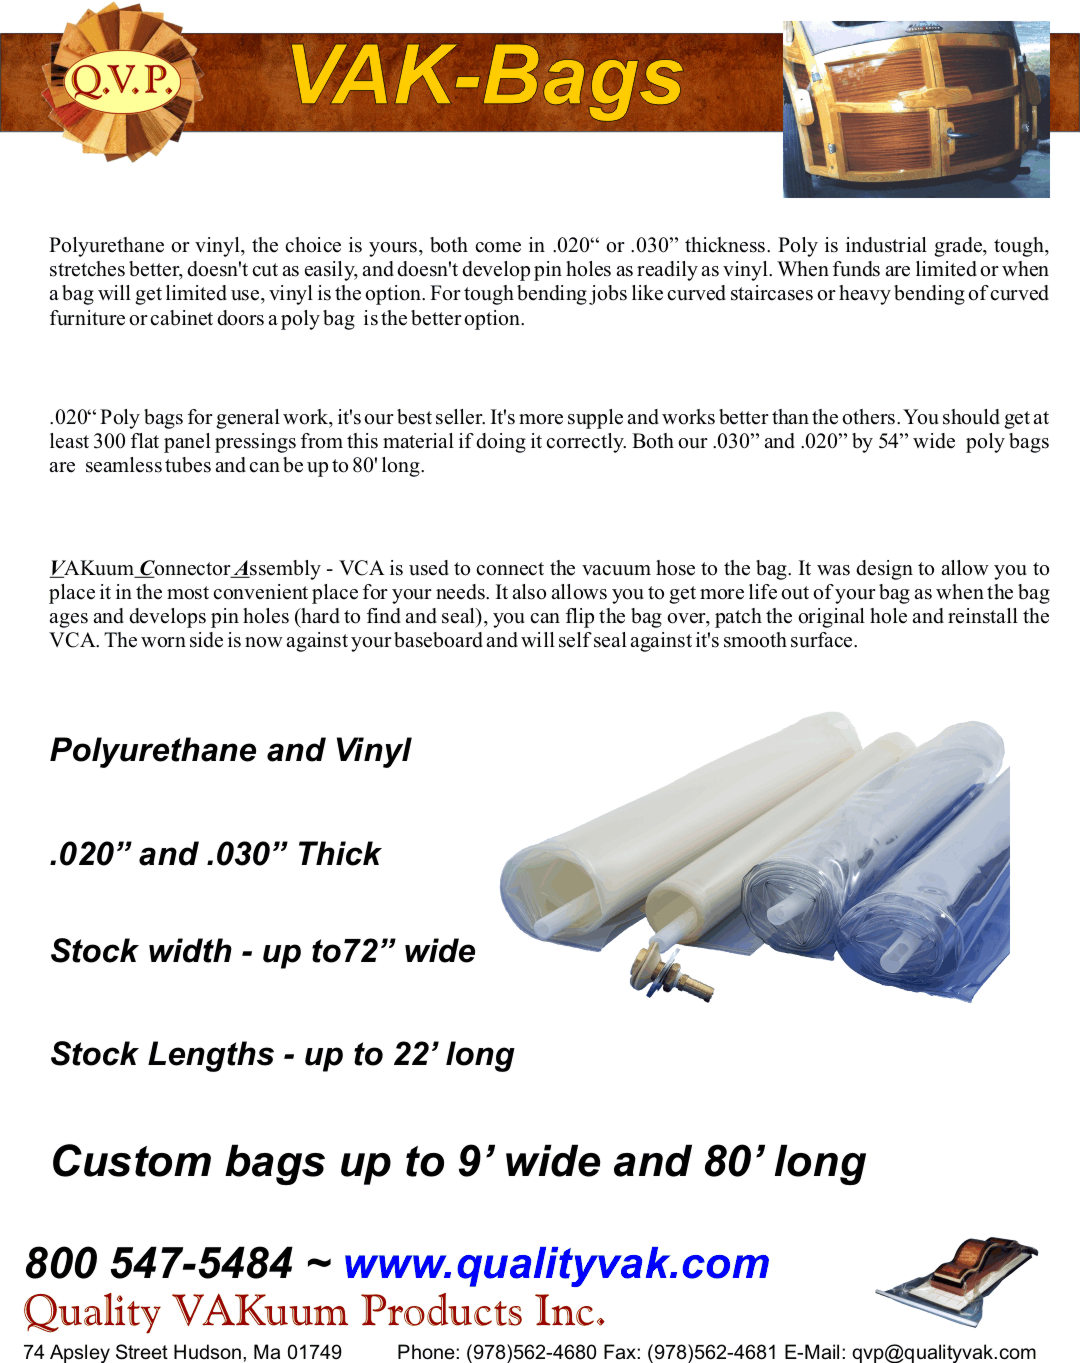 Quality VAKuum Products Brochure Page 10